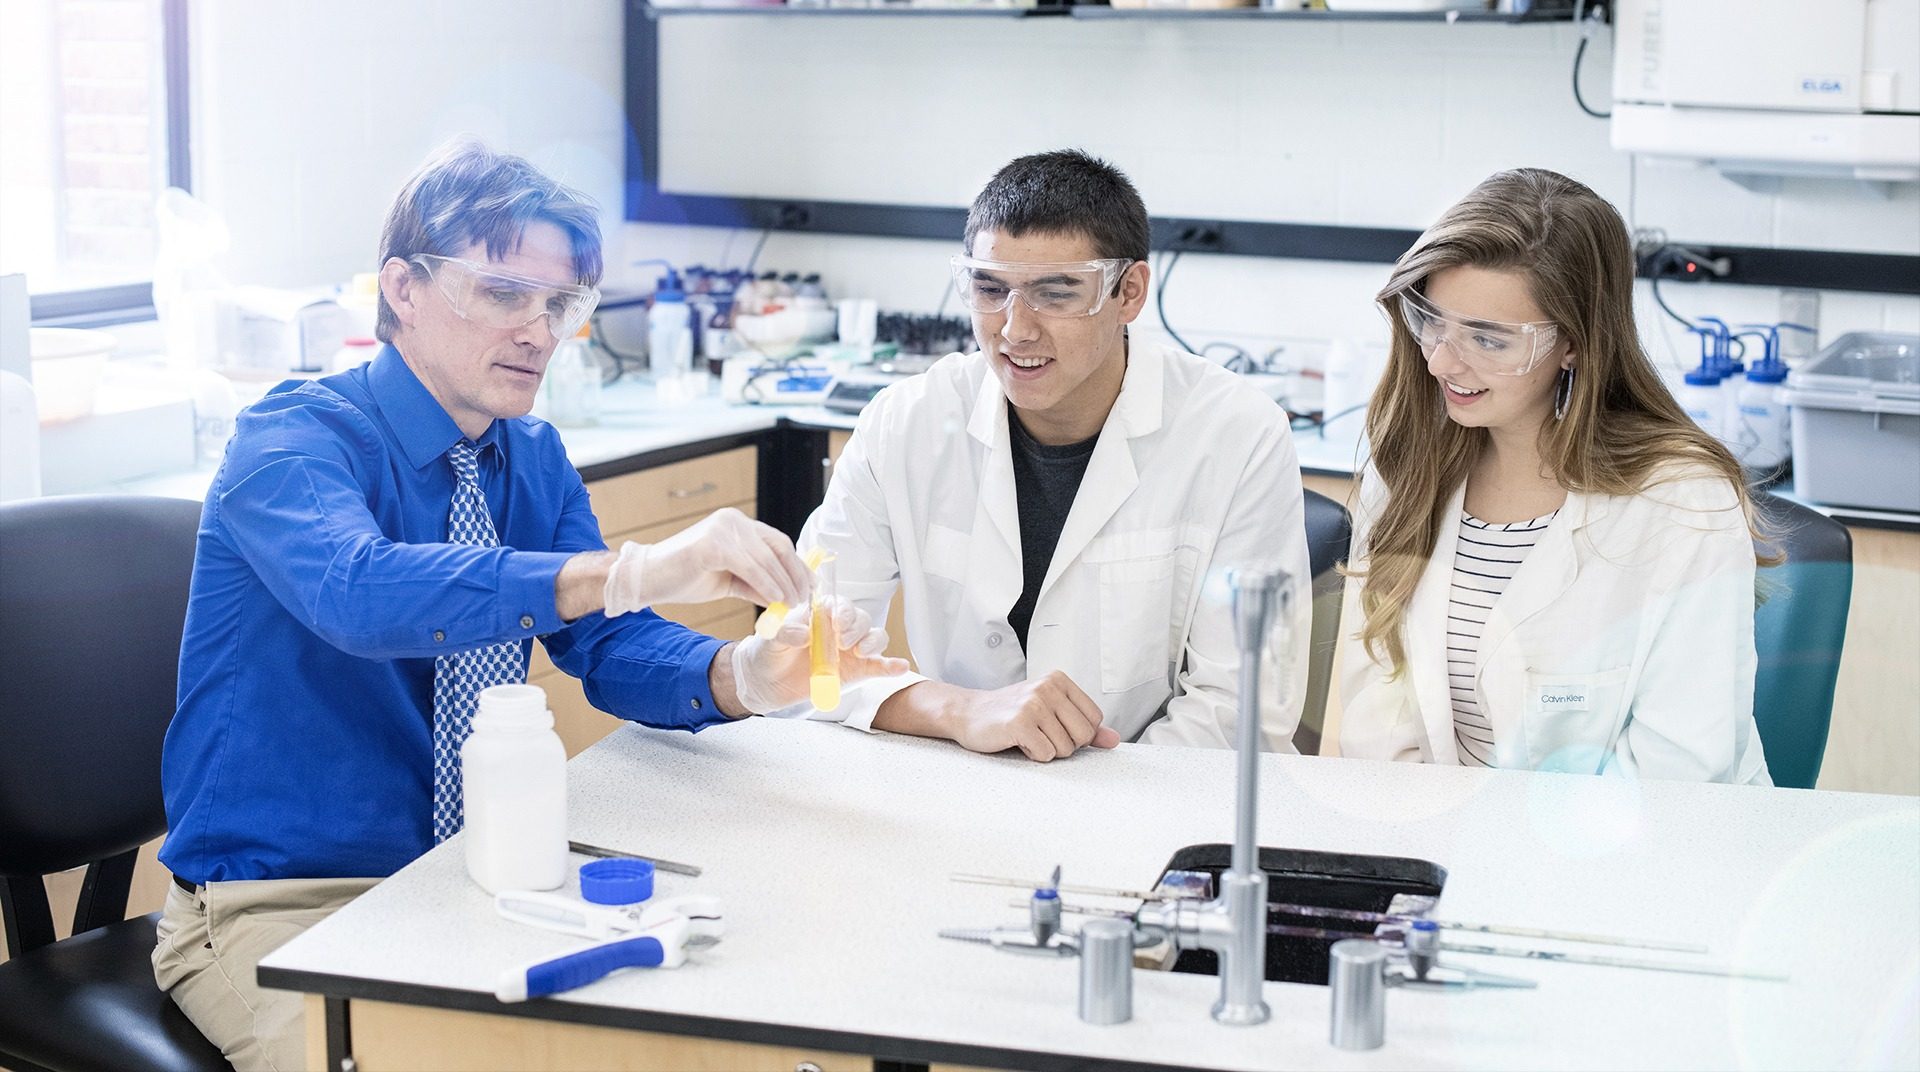 Professor mentoring science students in microbiology lab